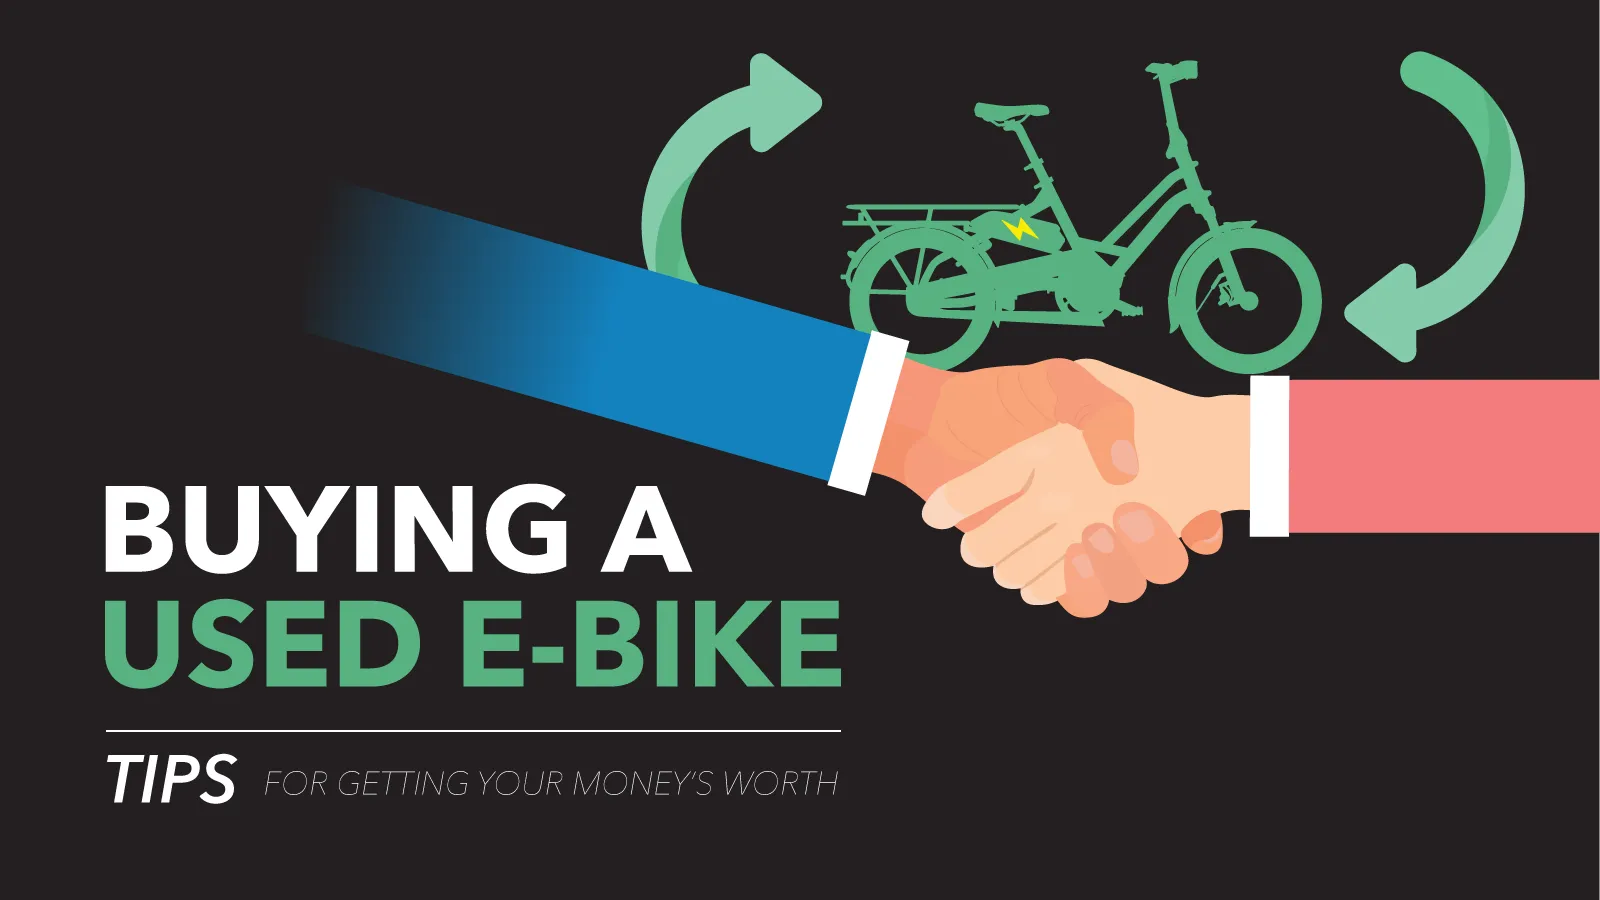 Guide to Buying a Used E-Bike